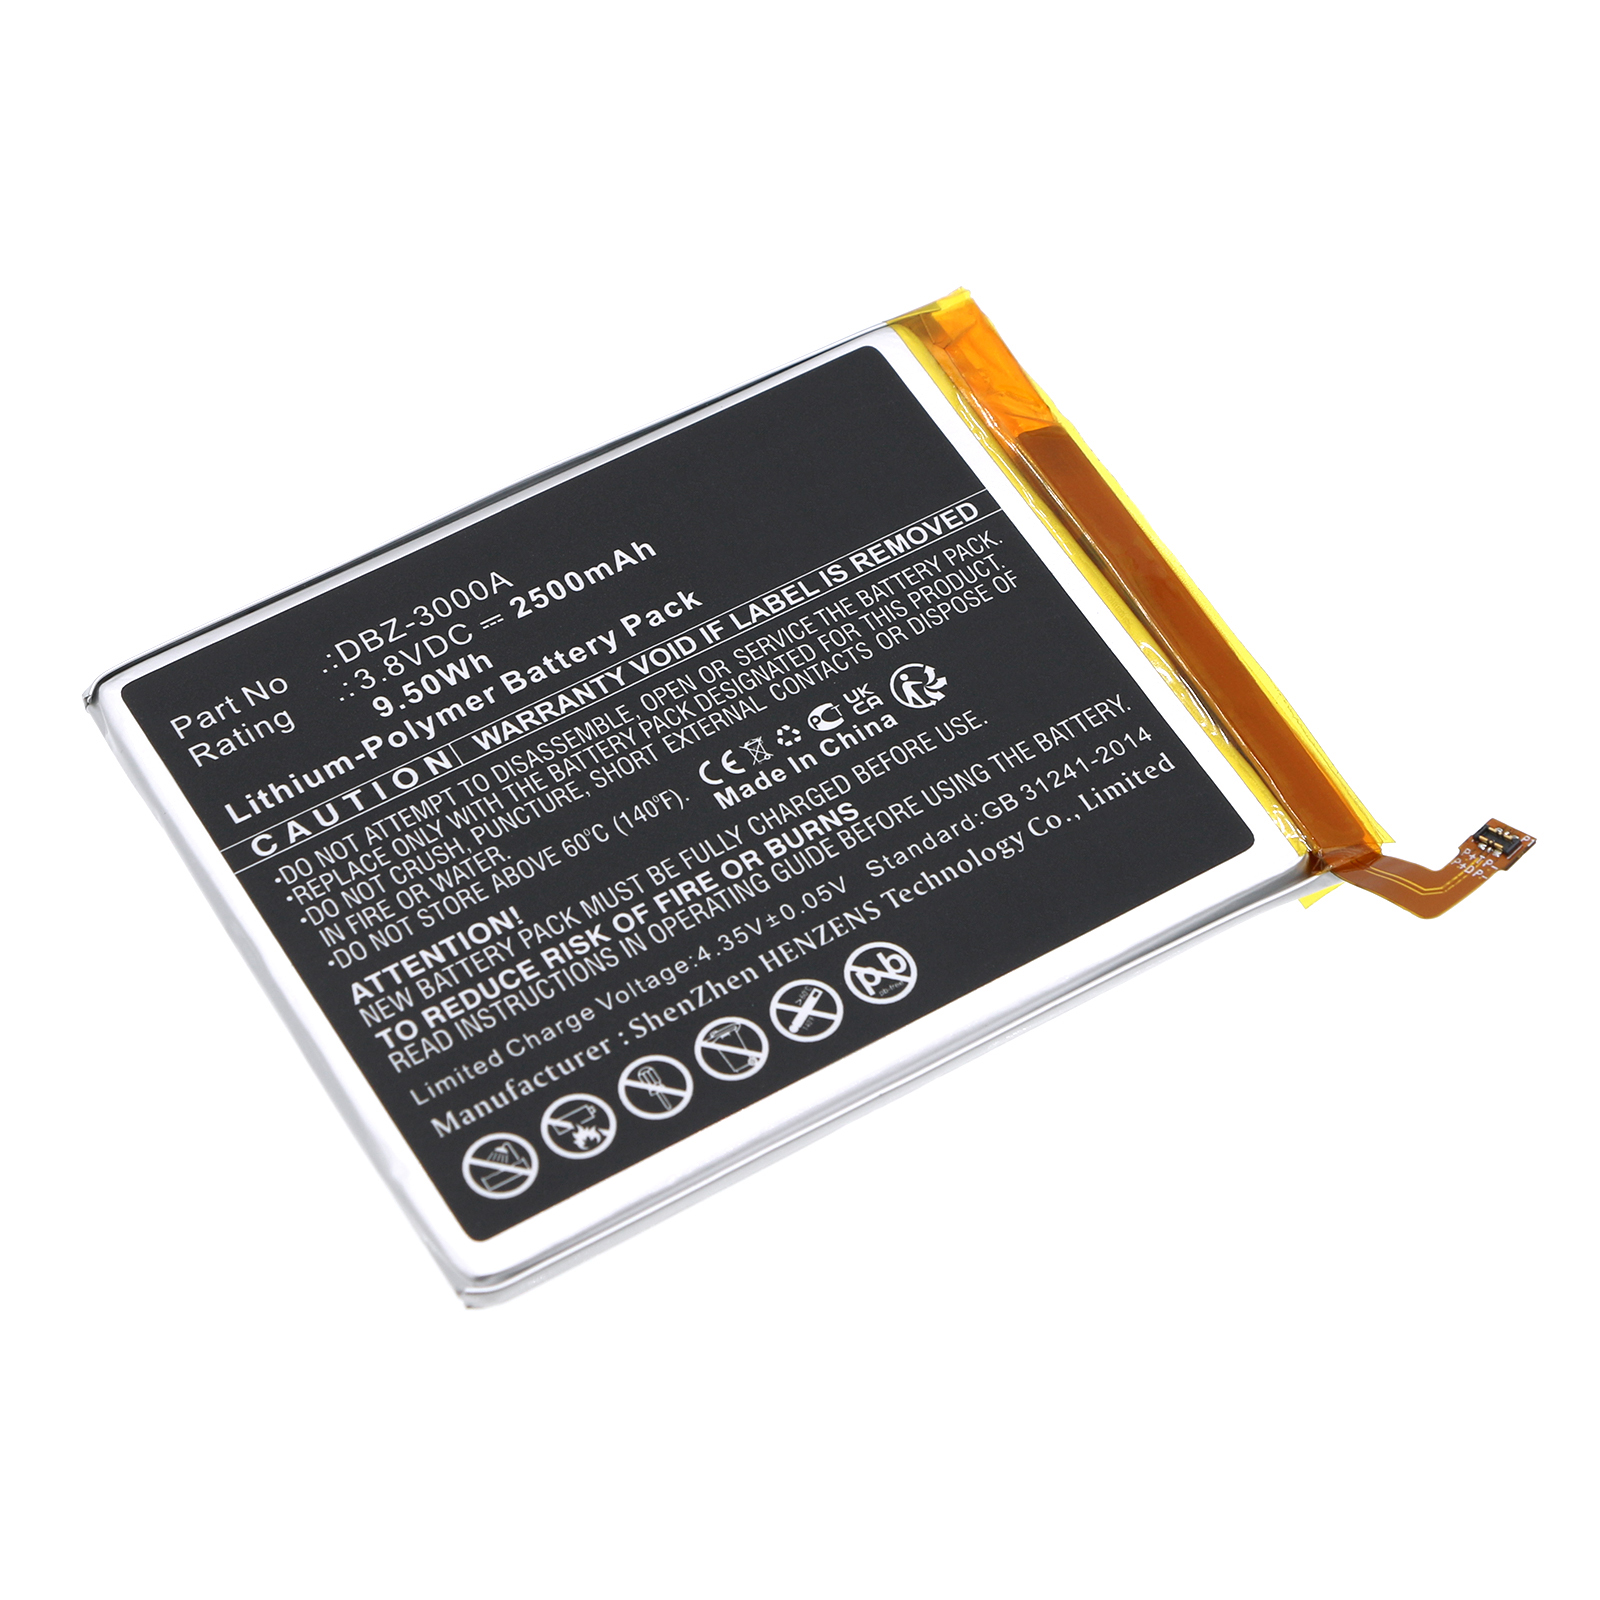 Synergy Digital Cell Phone Battery, Compatible with Doro DBZ-3000A Cell Phone Battery (Li-Pol, 3.8V, 2500mAh)